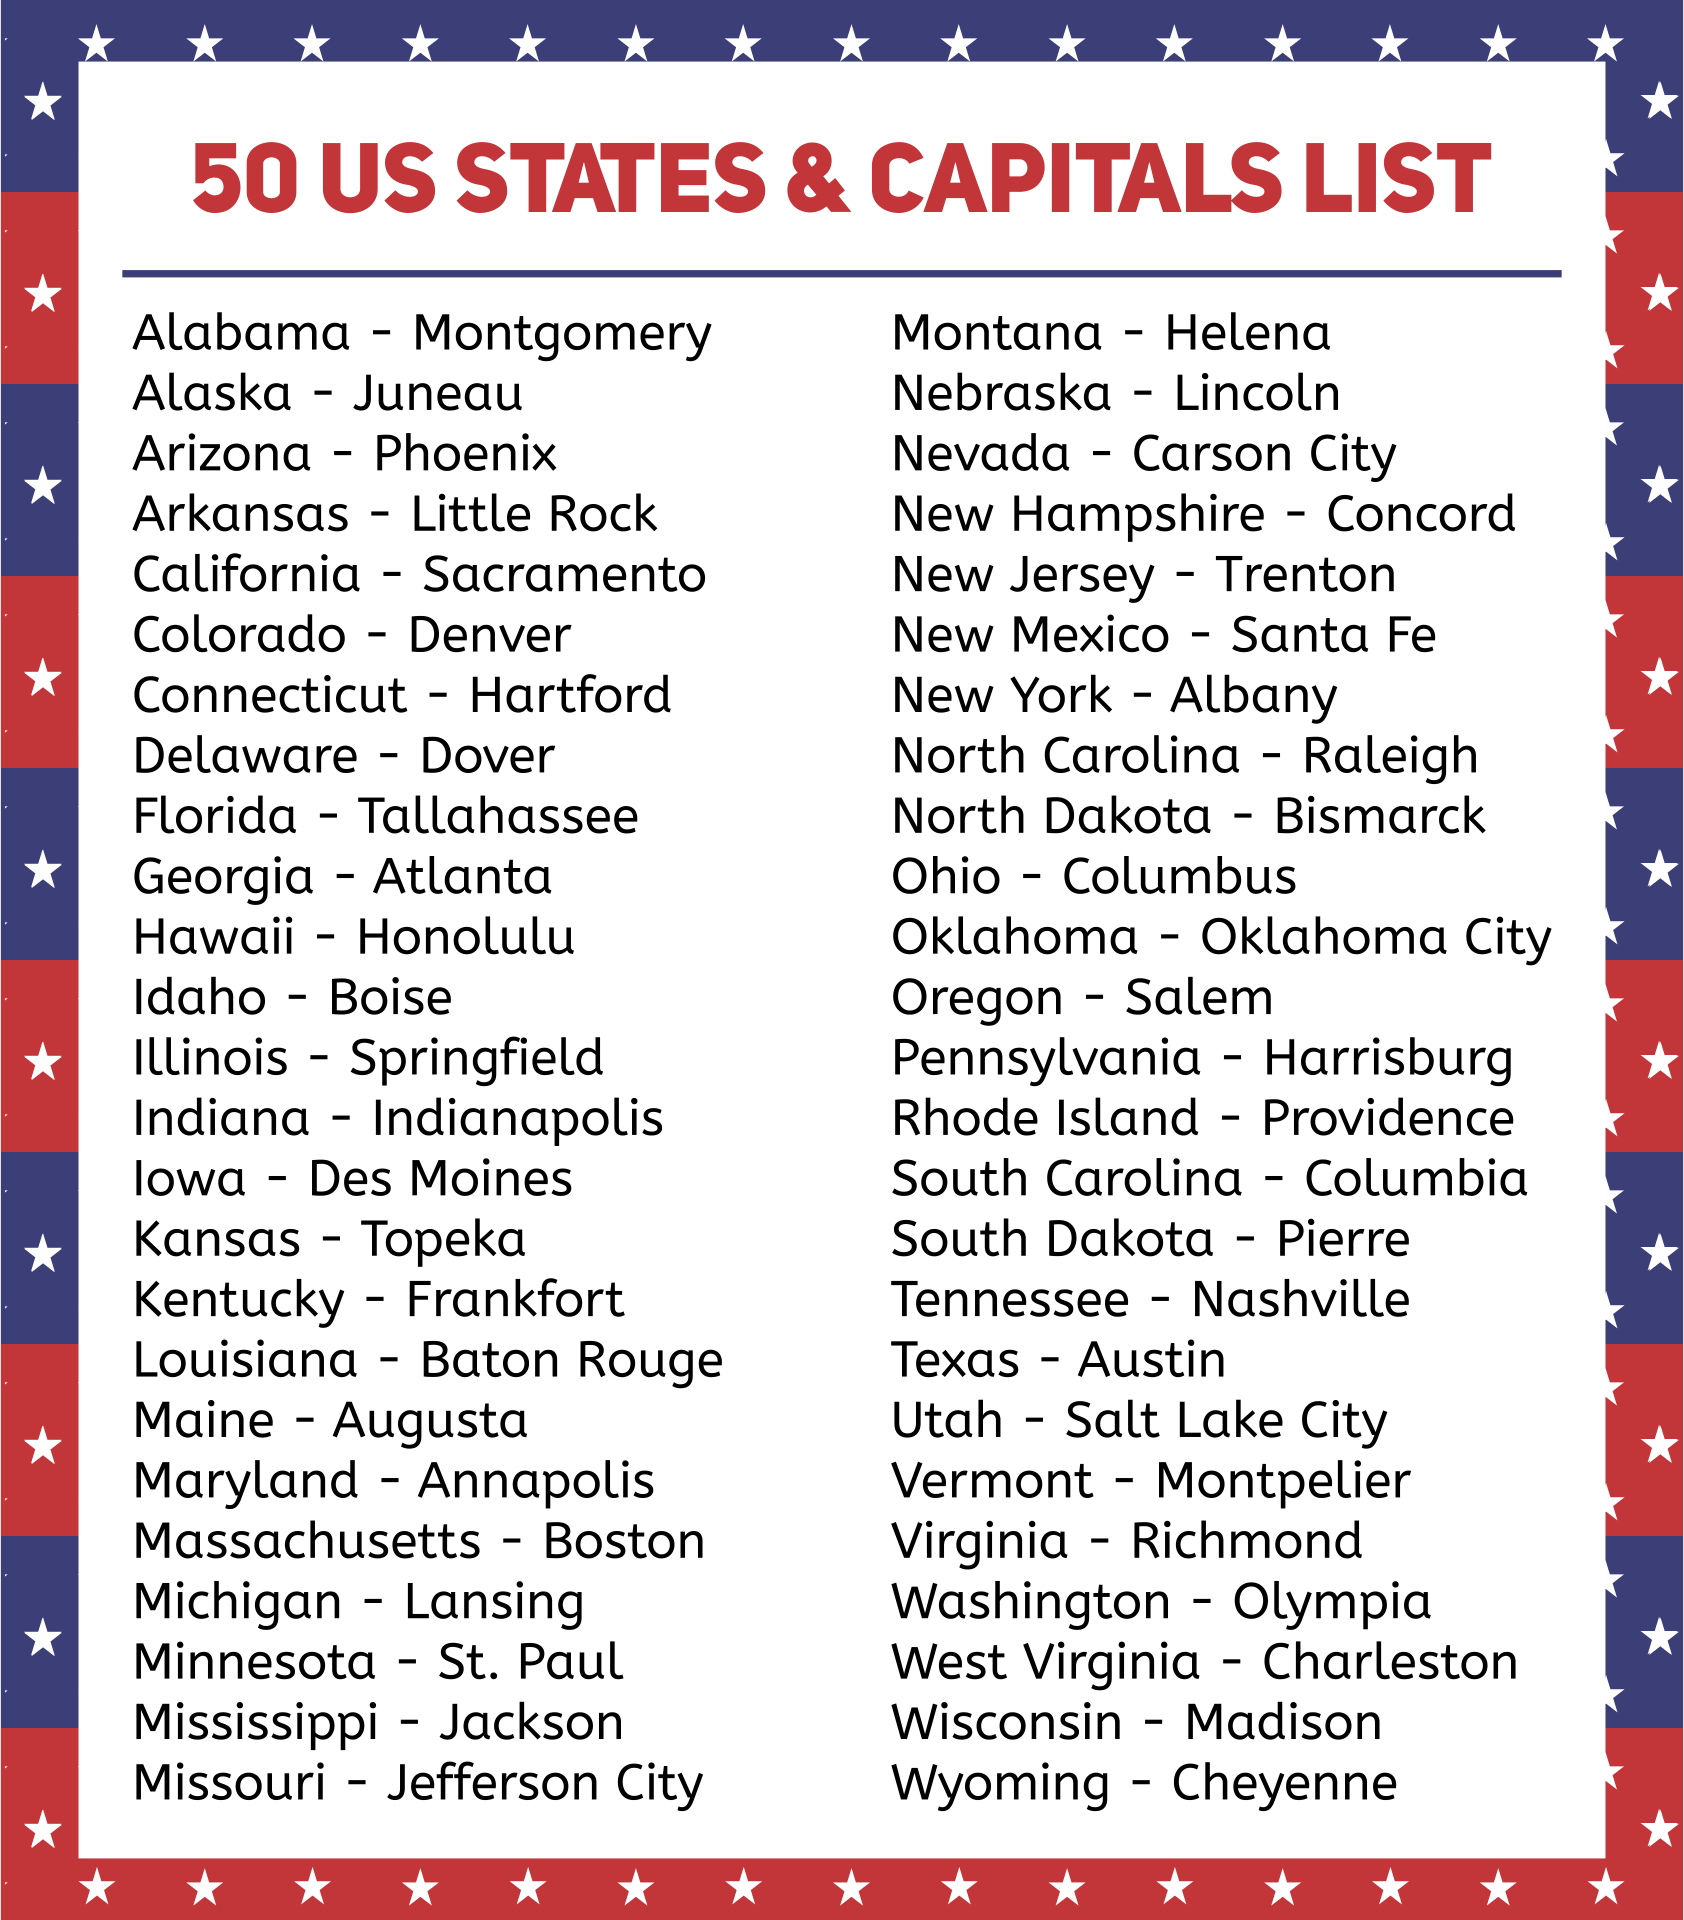 8 Best Images of Us State Capitals List Printable - States and Capitals ...